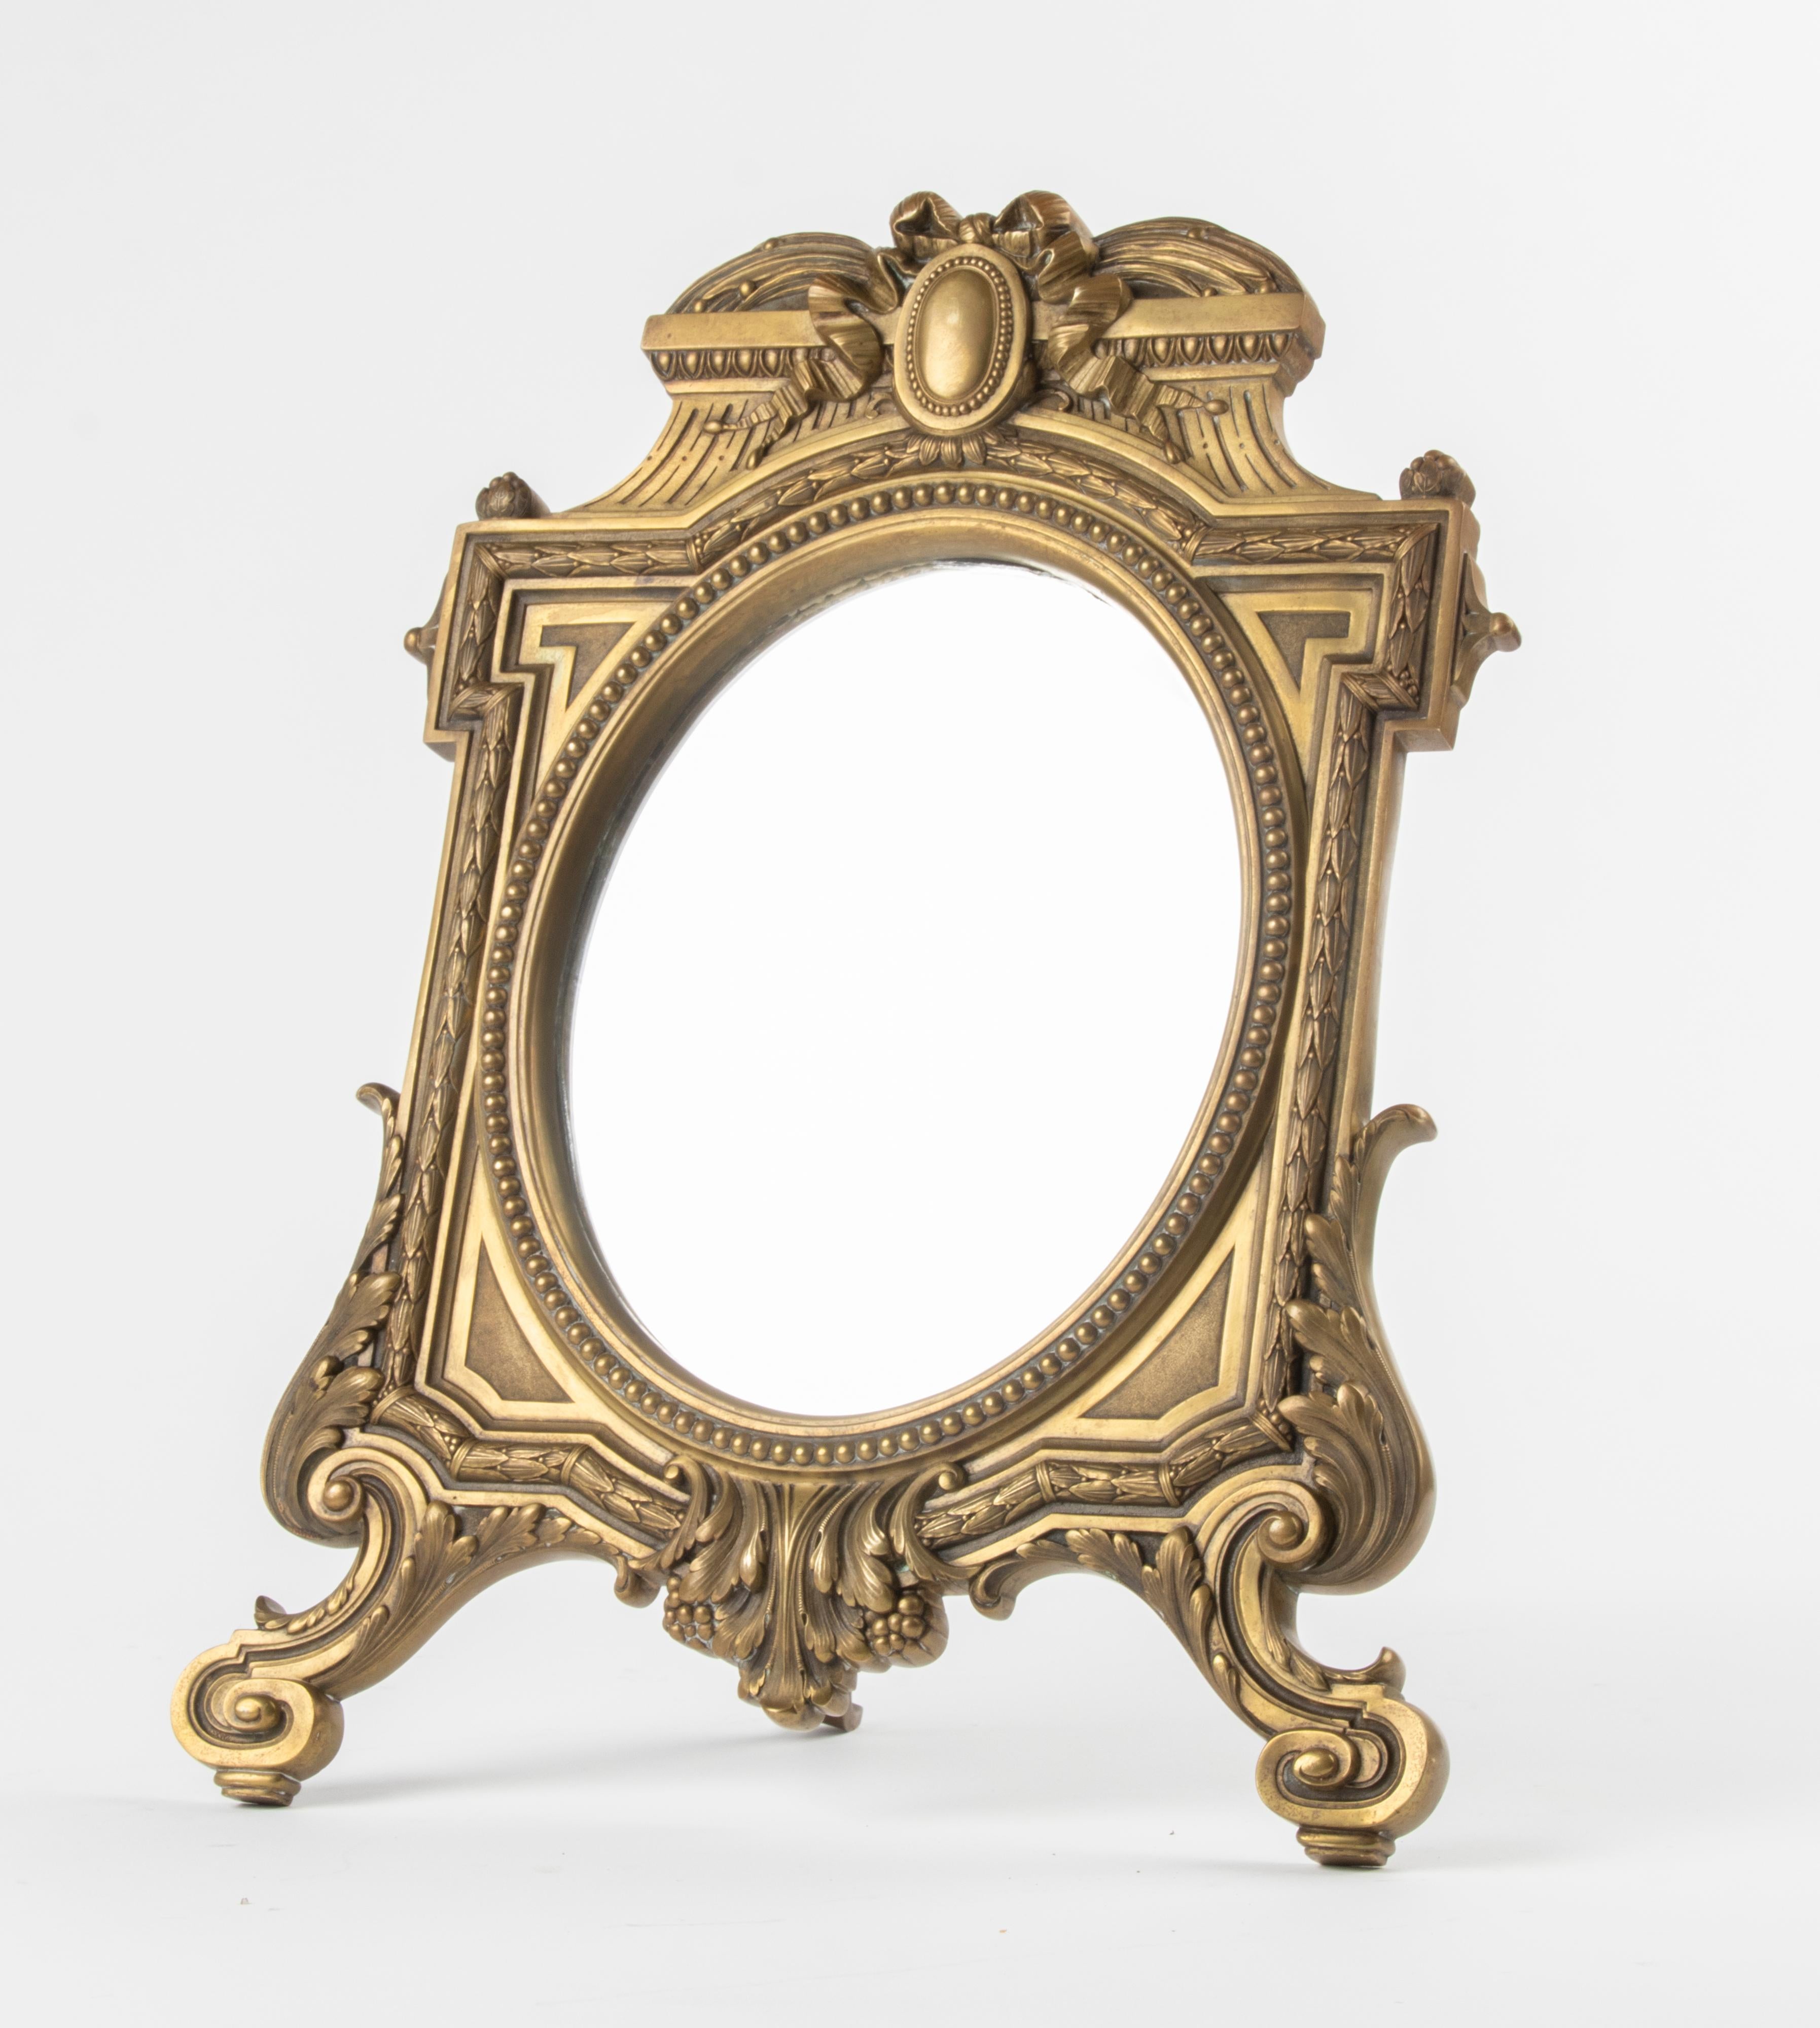 Antique bronze table mirror in Louis Seize style. The mirror is beautifully decorated with laurel leaf and pearl edges. The mirror dates from about 1880-1890 and comes from France. Nice old patina and in good condition.